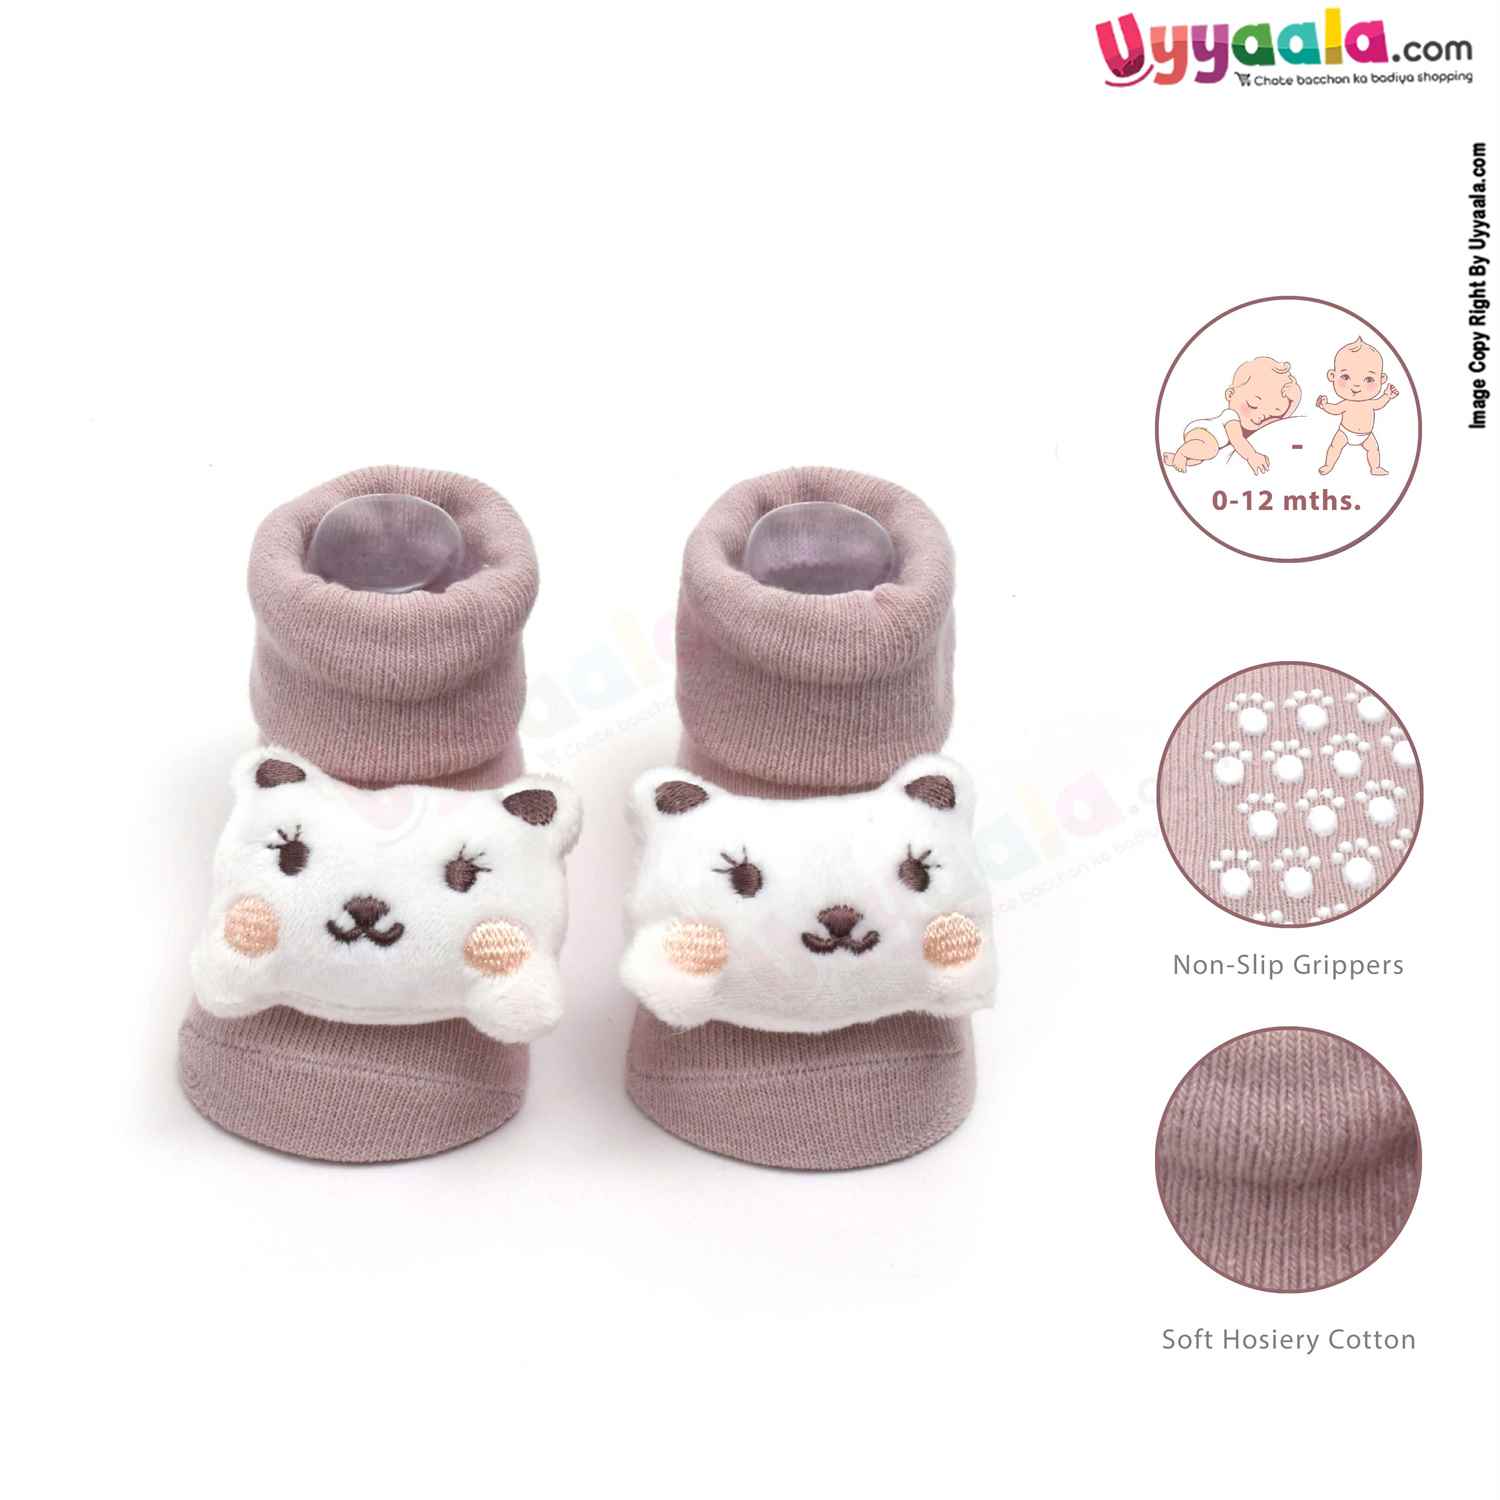 Hosiery Cotton Baby Socks with Hello Kitty Character ,0 to 12m Age- Brown